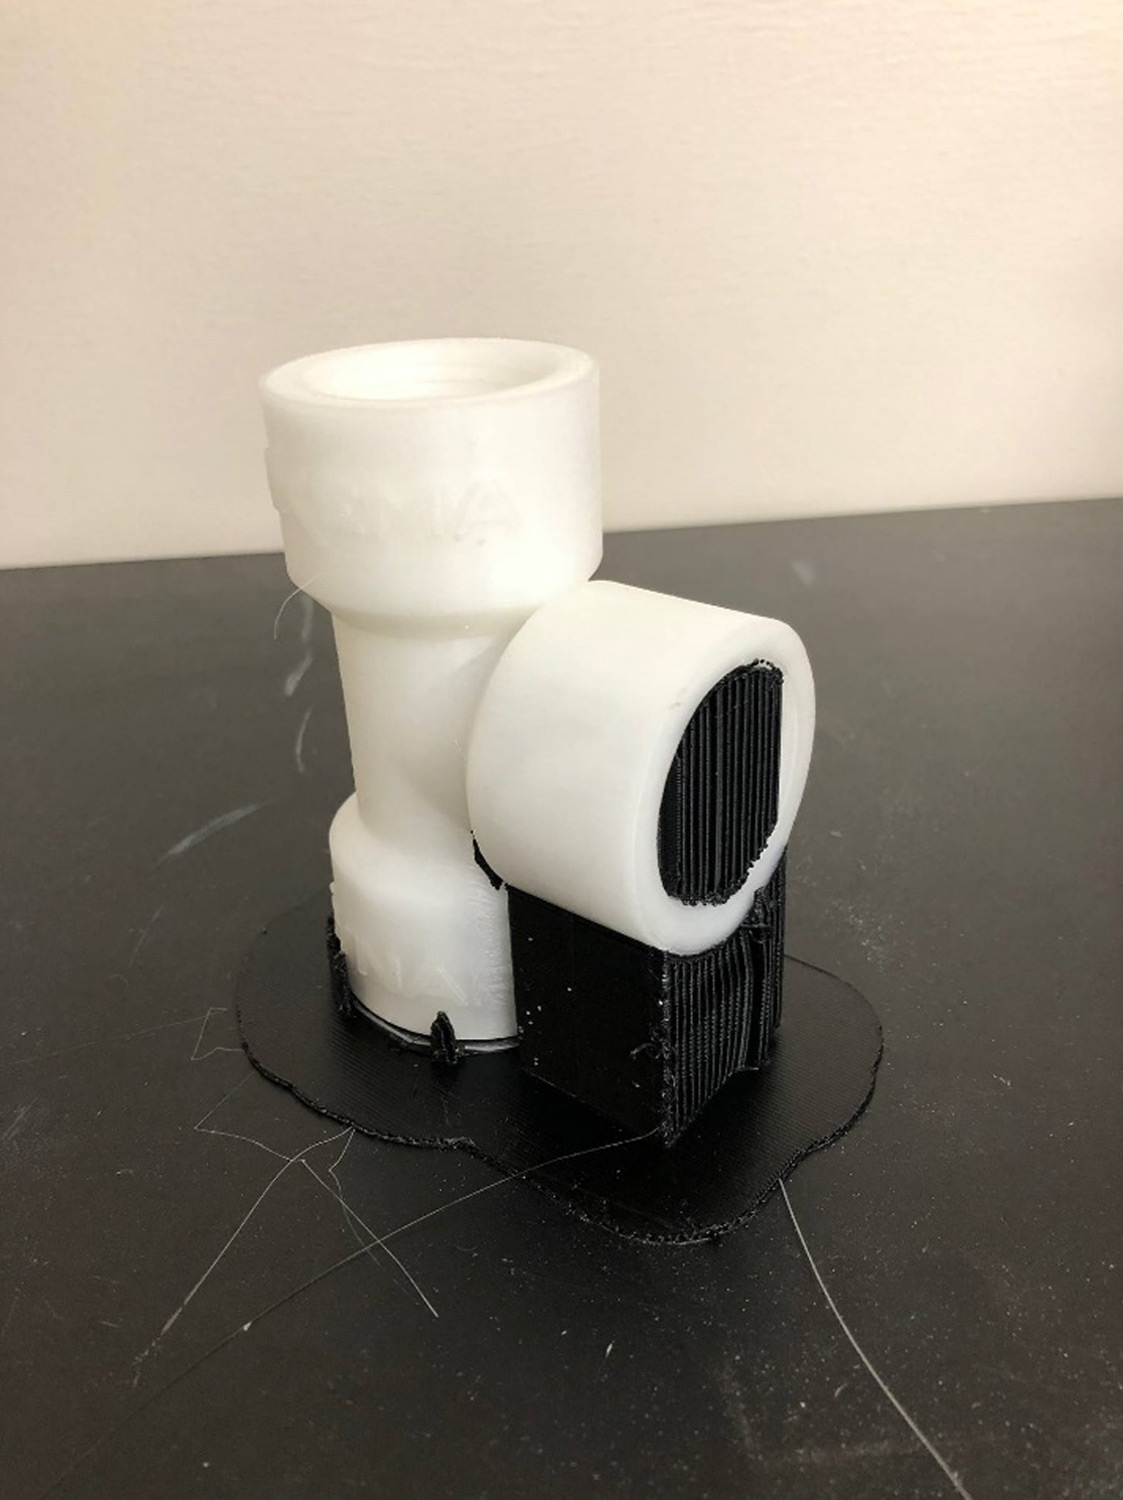 support materials (black) compatible with PVDF (white), used in 3D printing a tee fitting